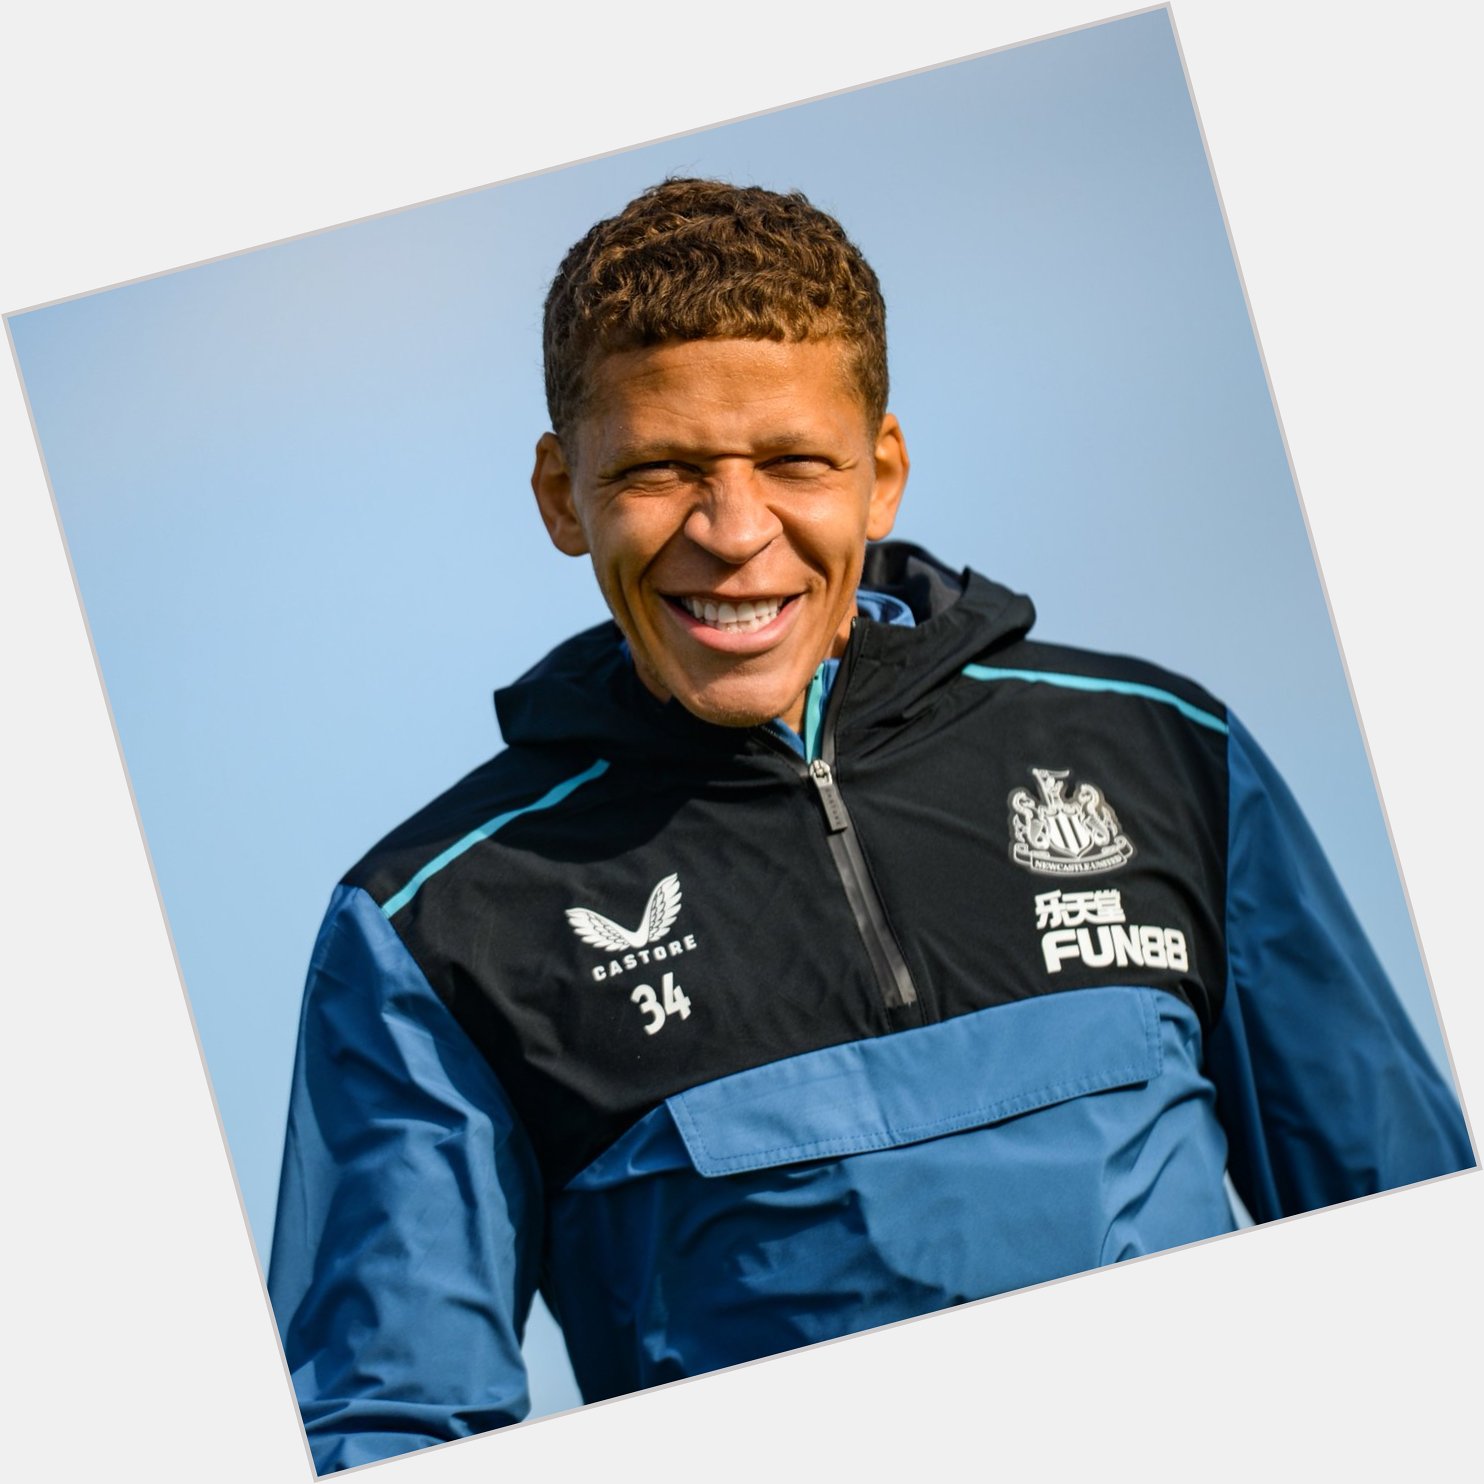 Wishing Dwight Gayle a very happy birthday!  Have a good day,     